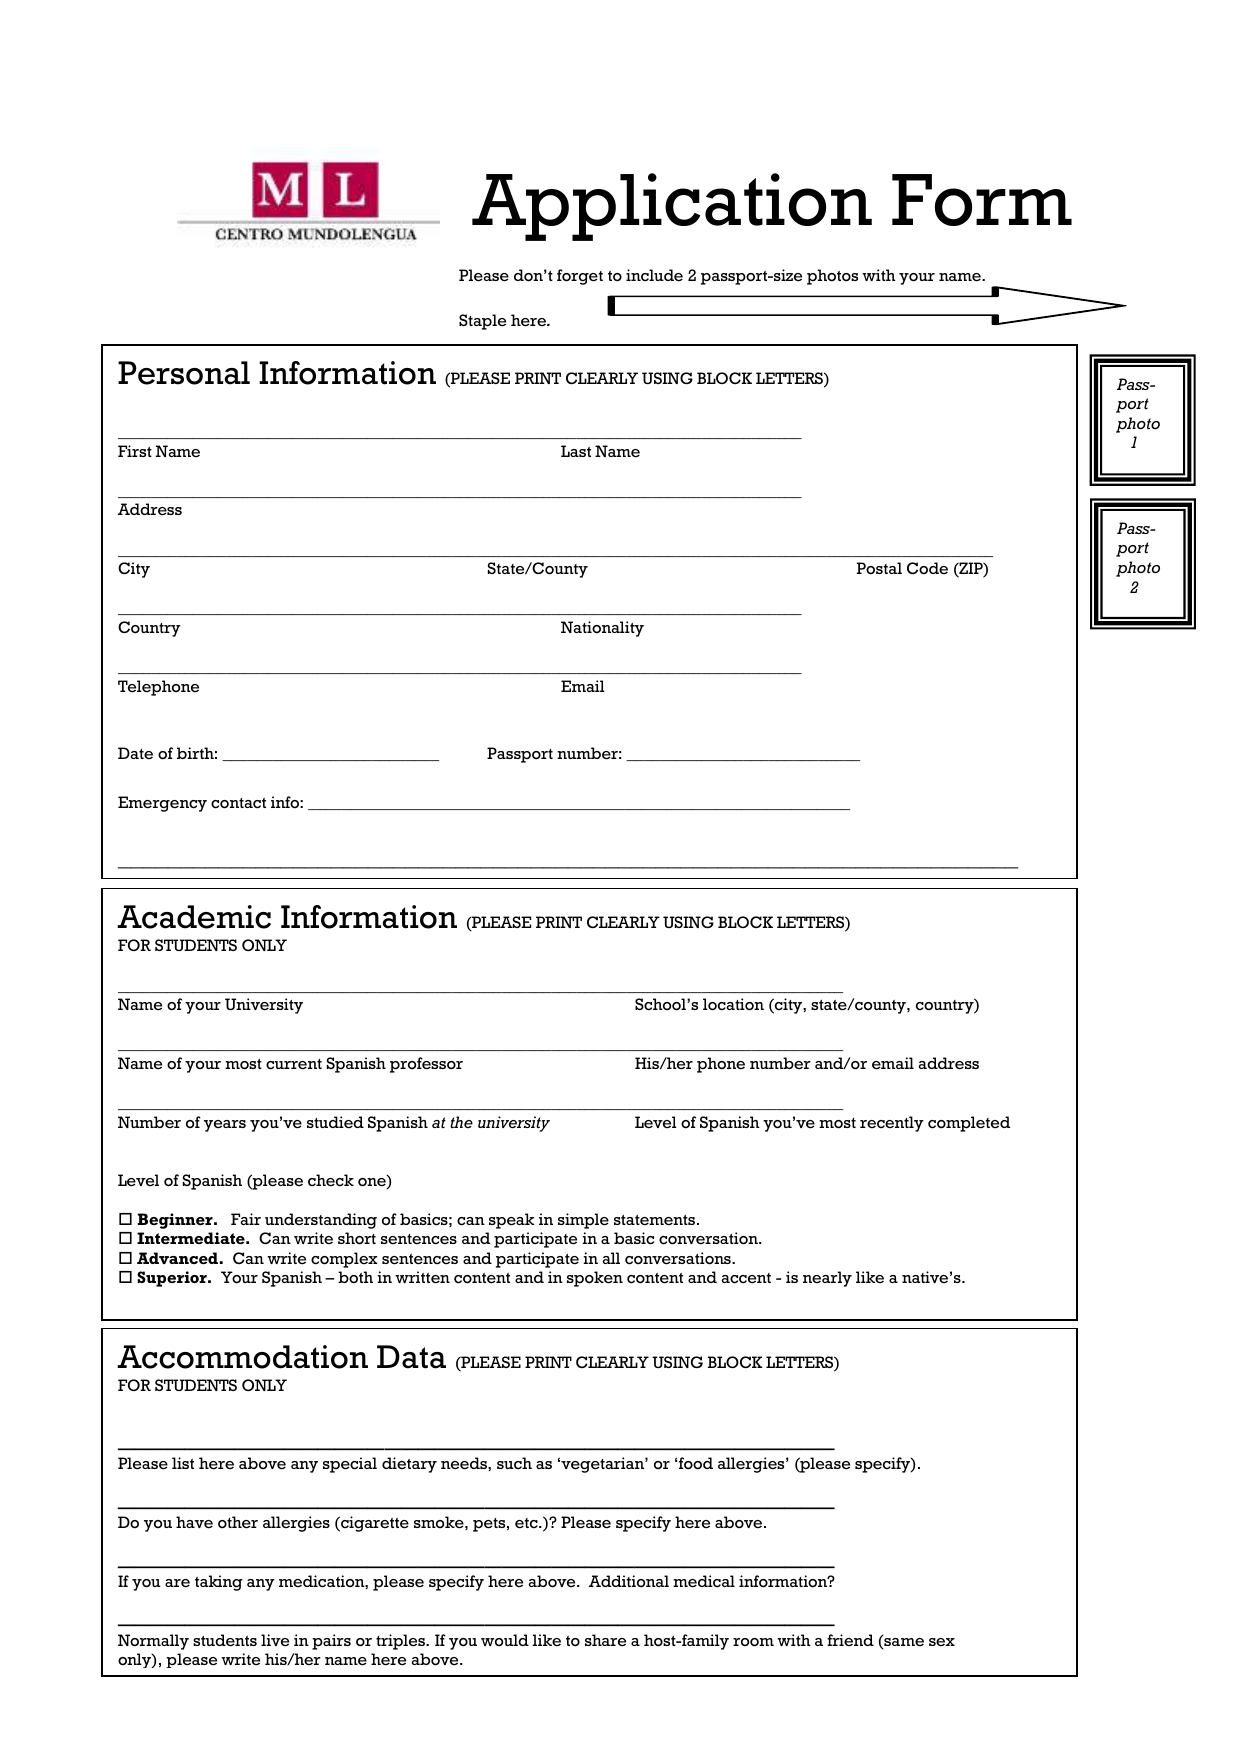 how to fill in personal statement on application form